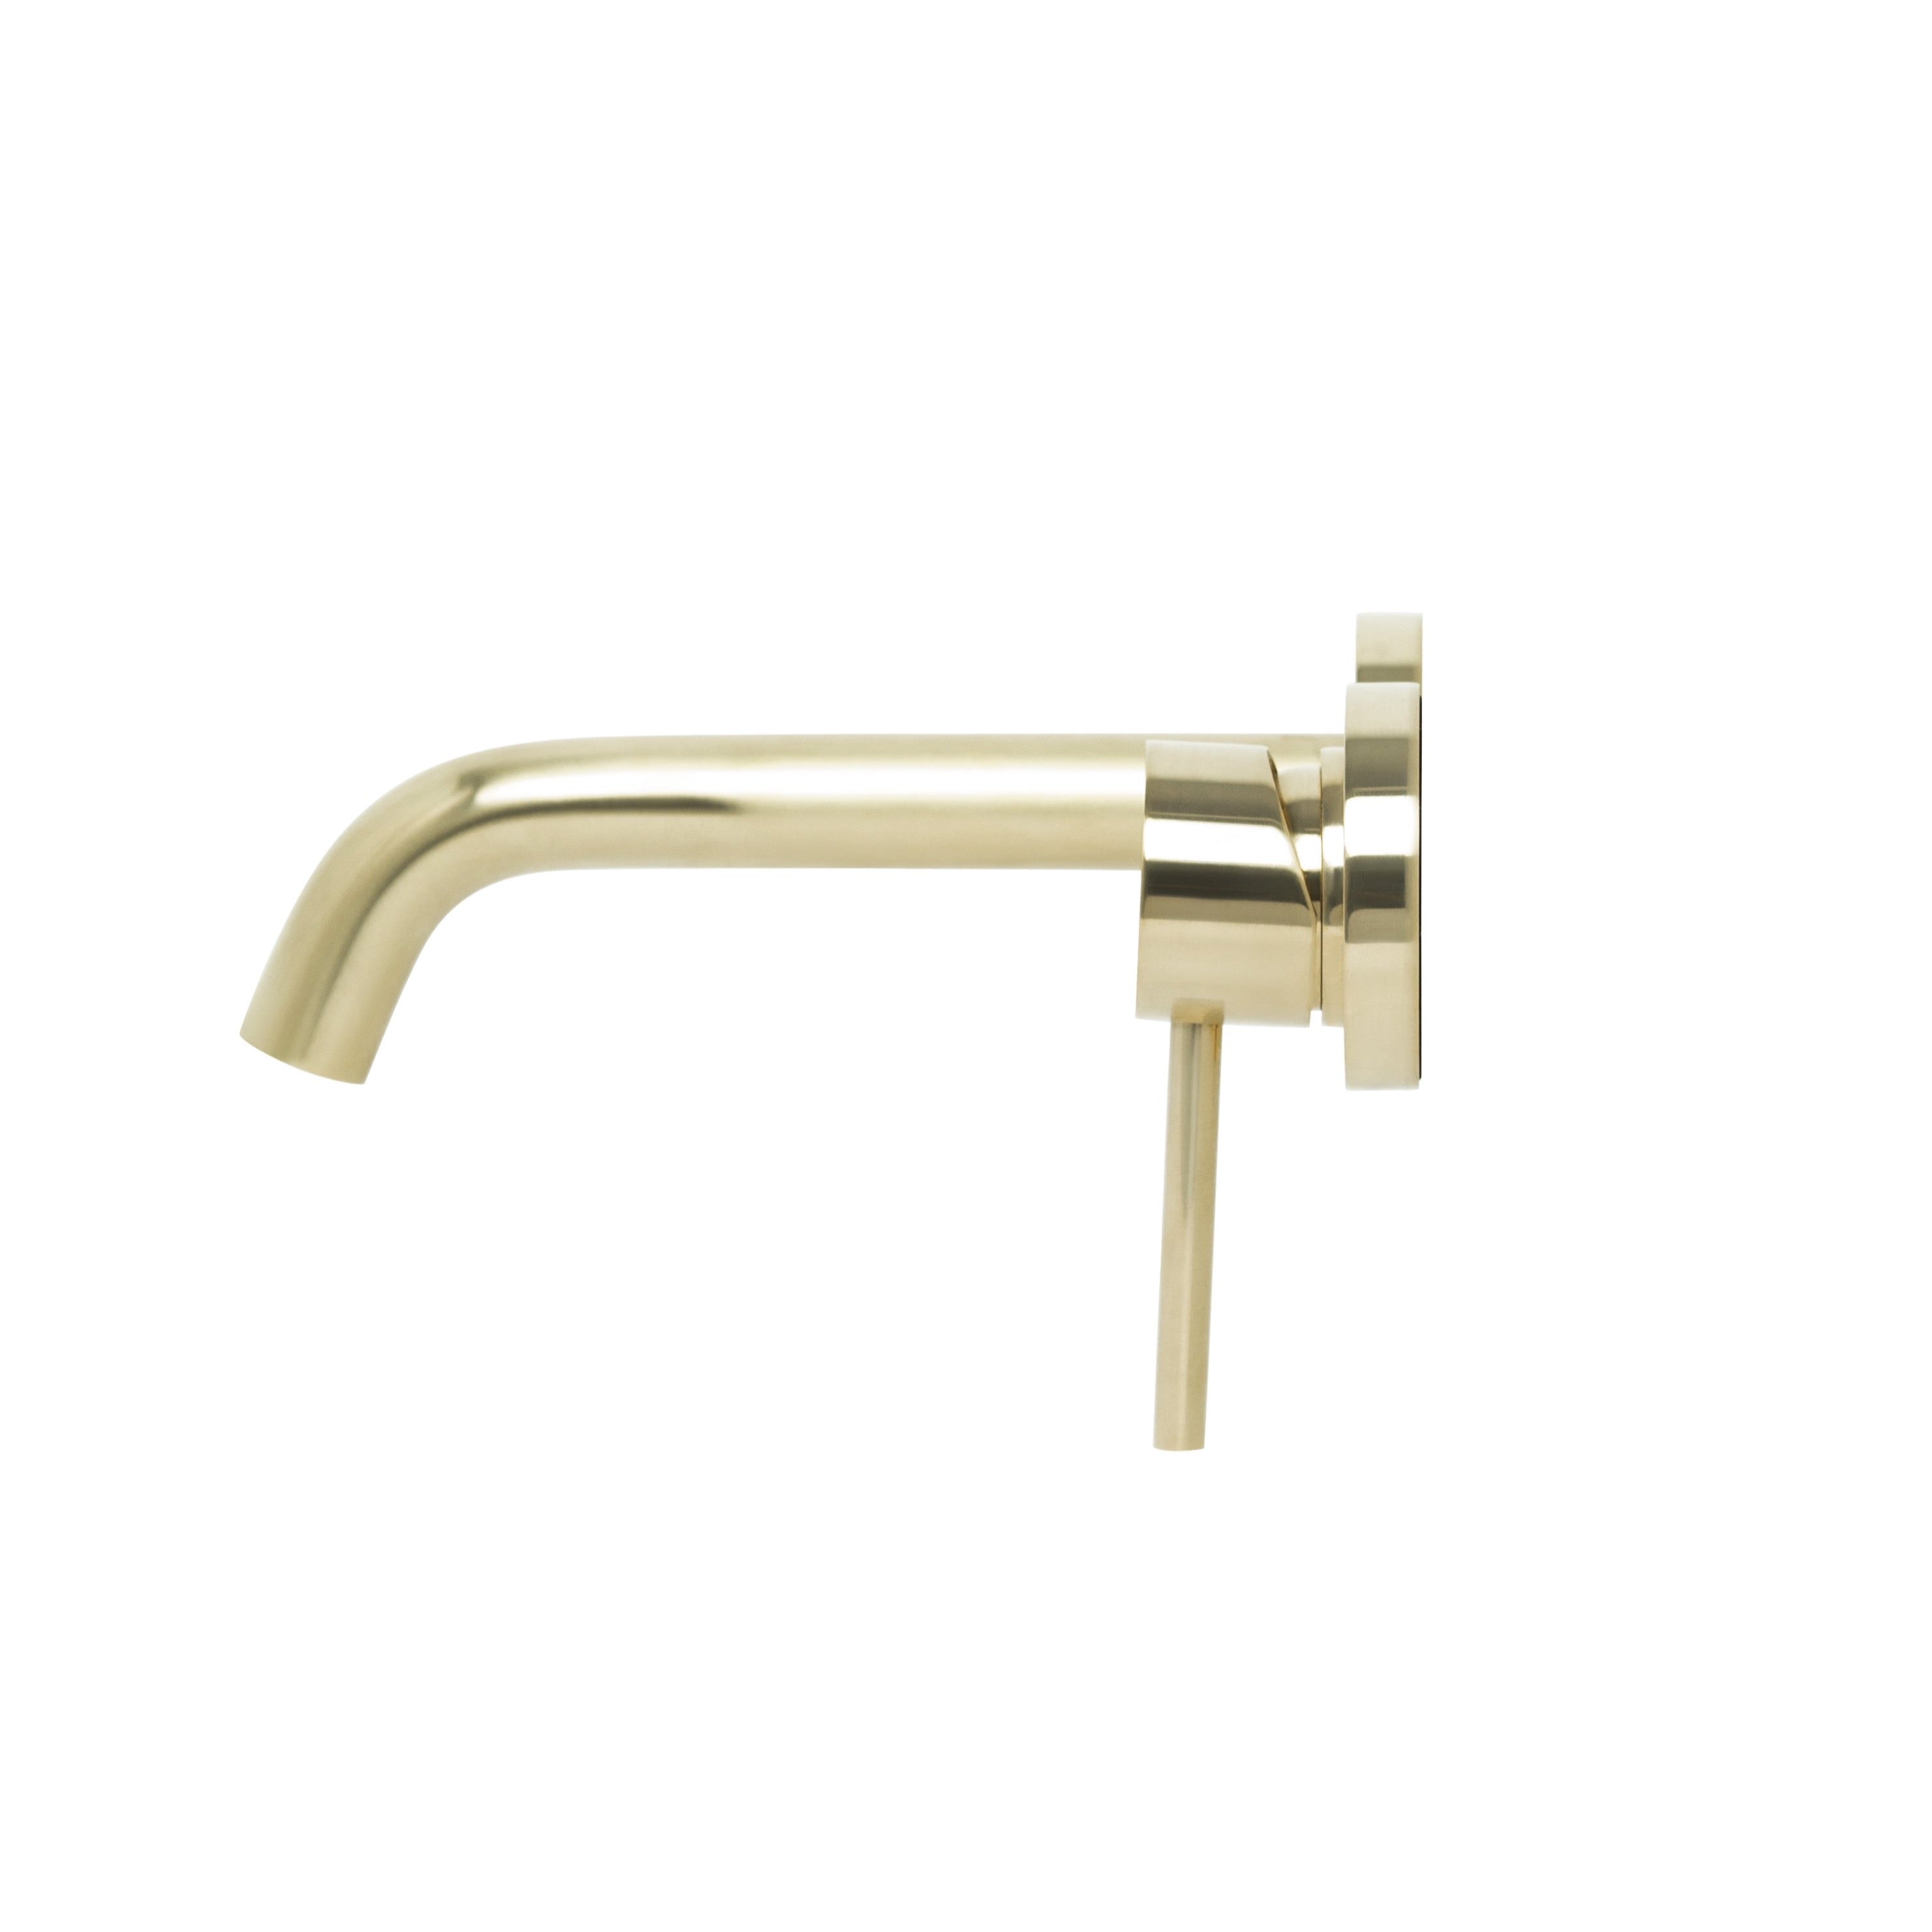 Bondi Pin Lever Wall Mixer Set with Curved Spout in Raw Brass